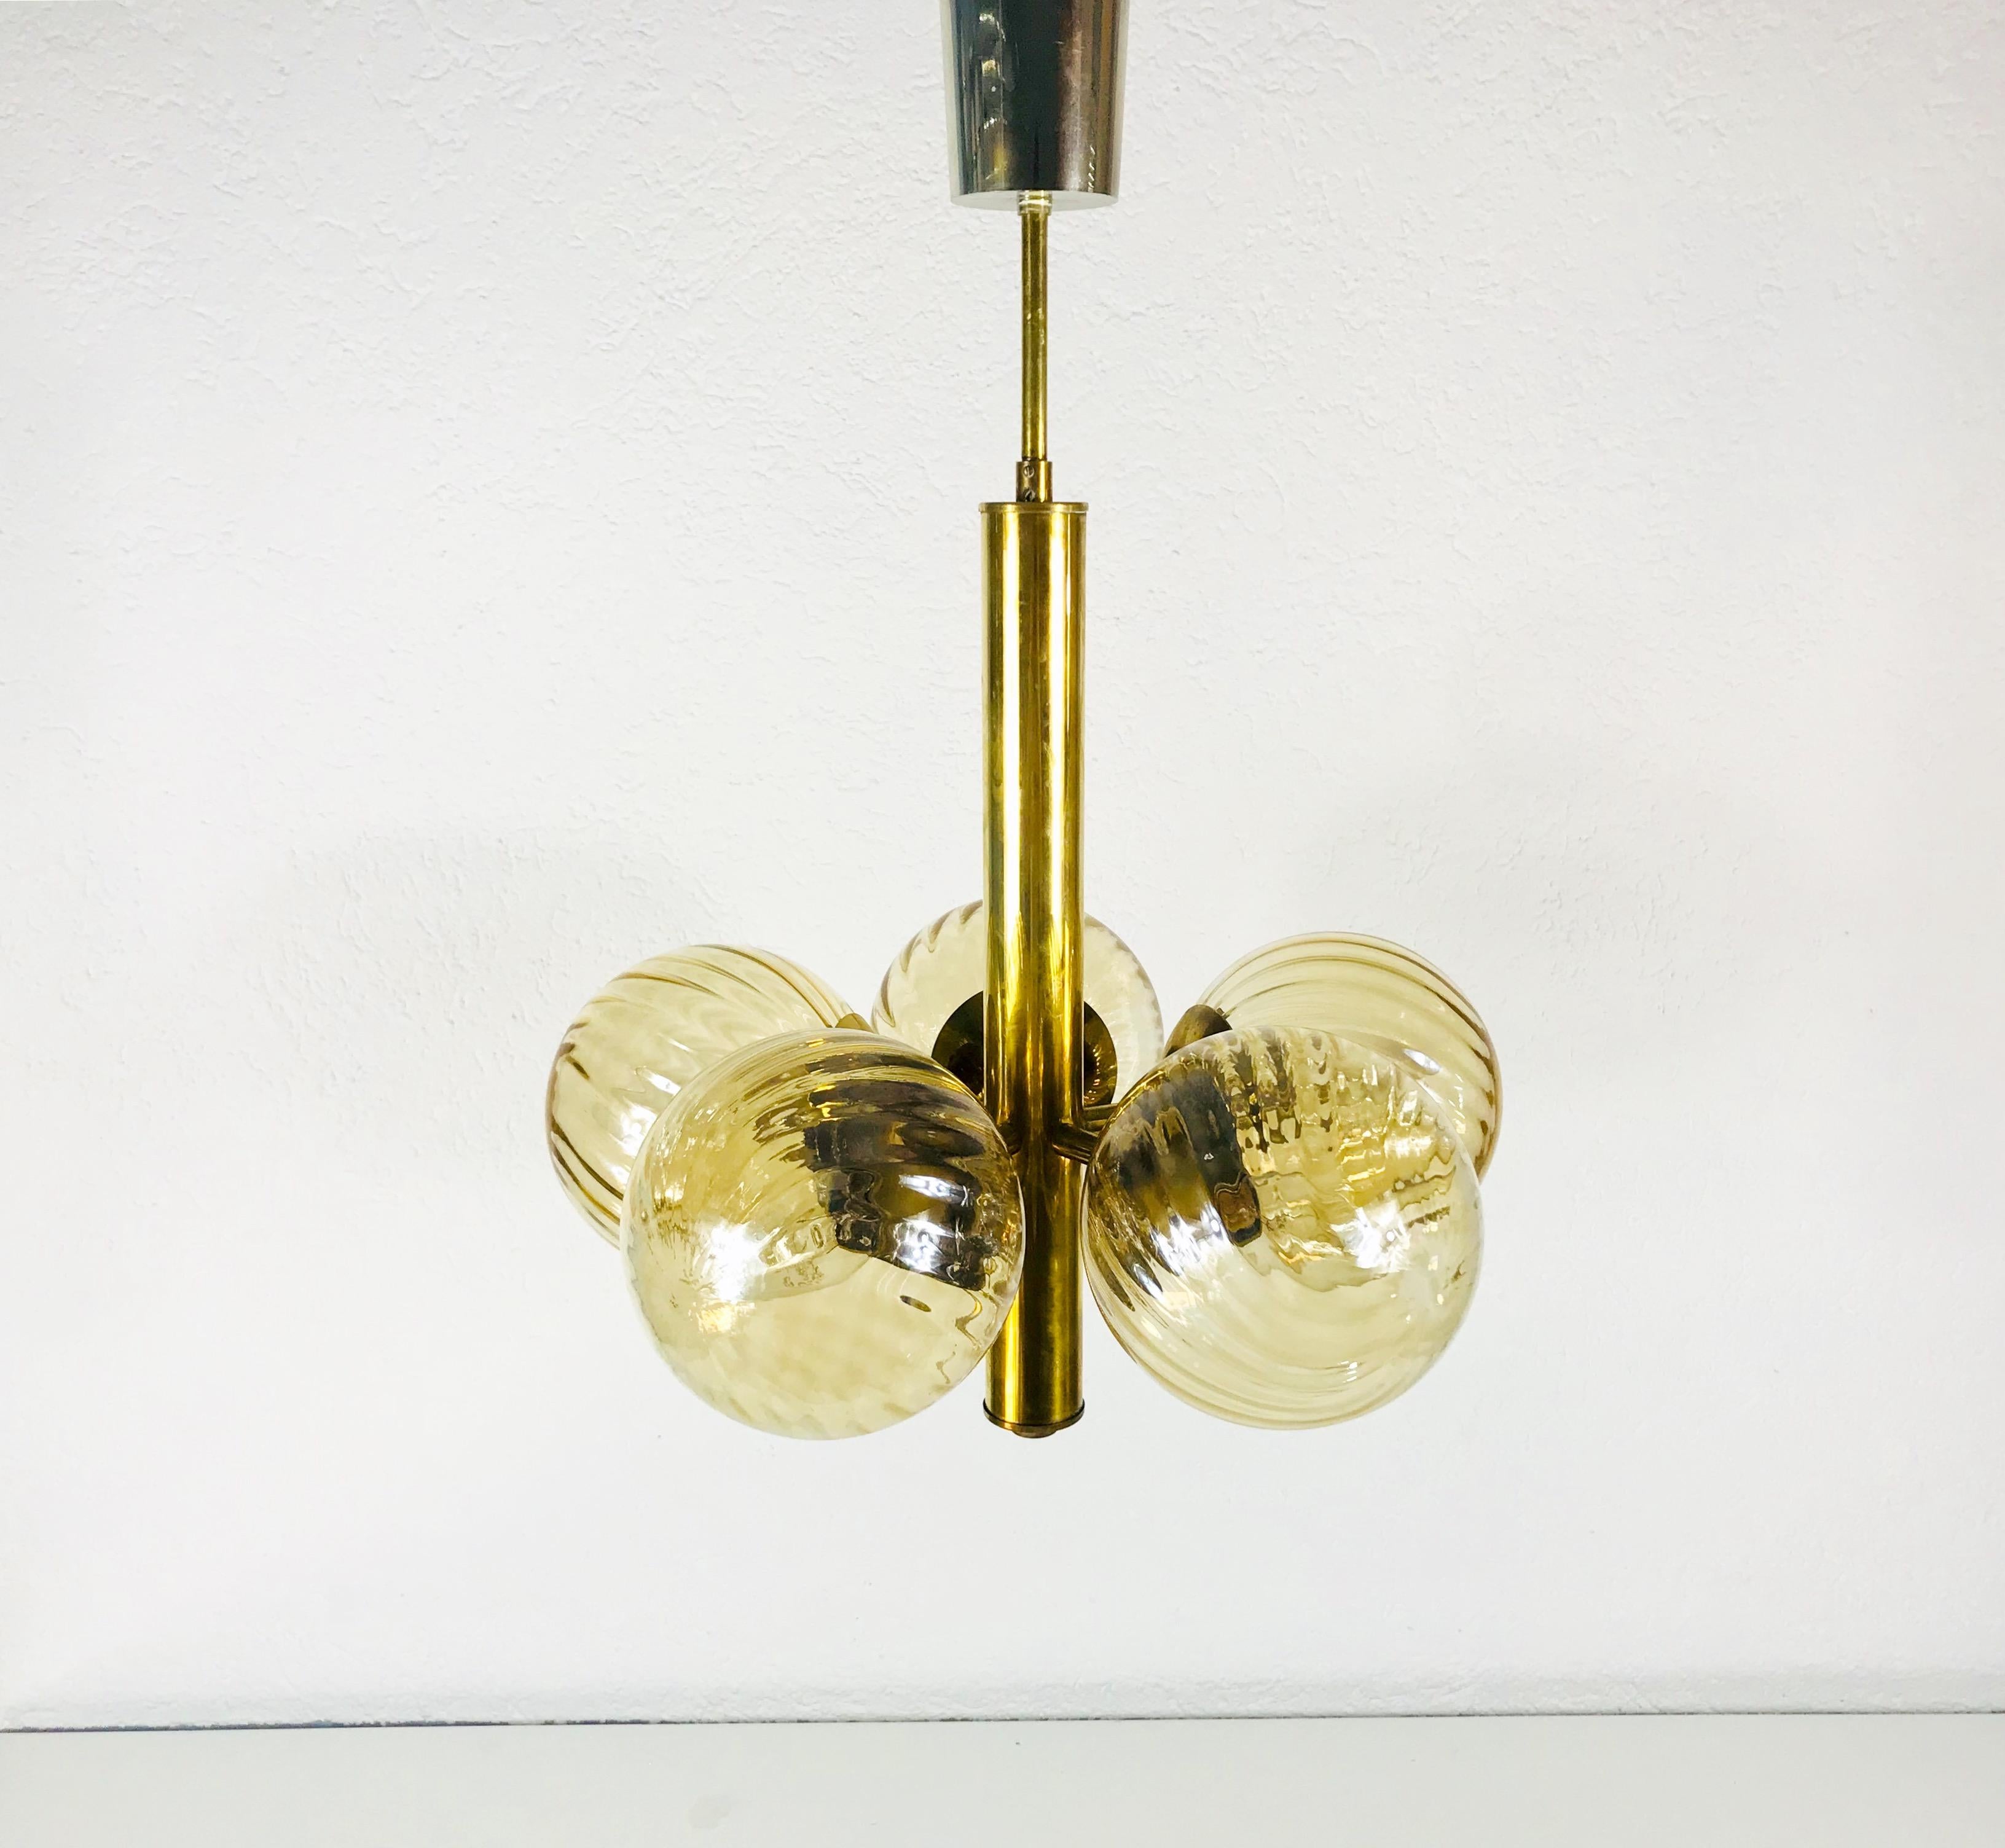 Metal Mid-Century Modern Golden Kaiser 5-Arm Space Age Chandelier, 1970s, Germany